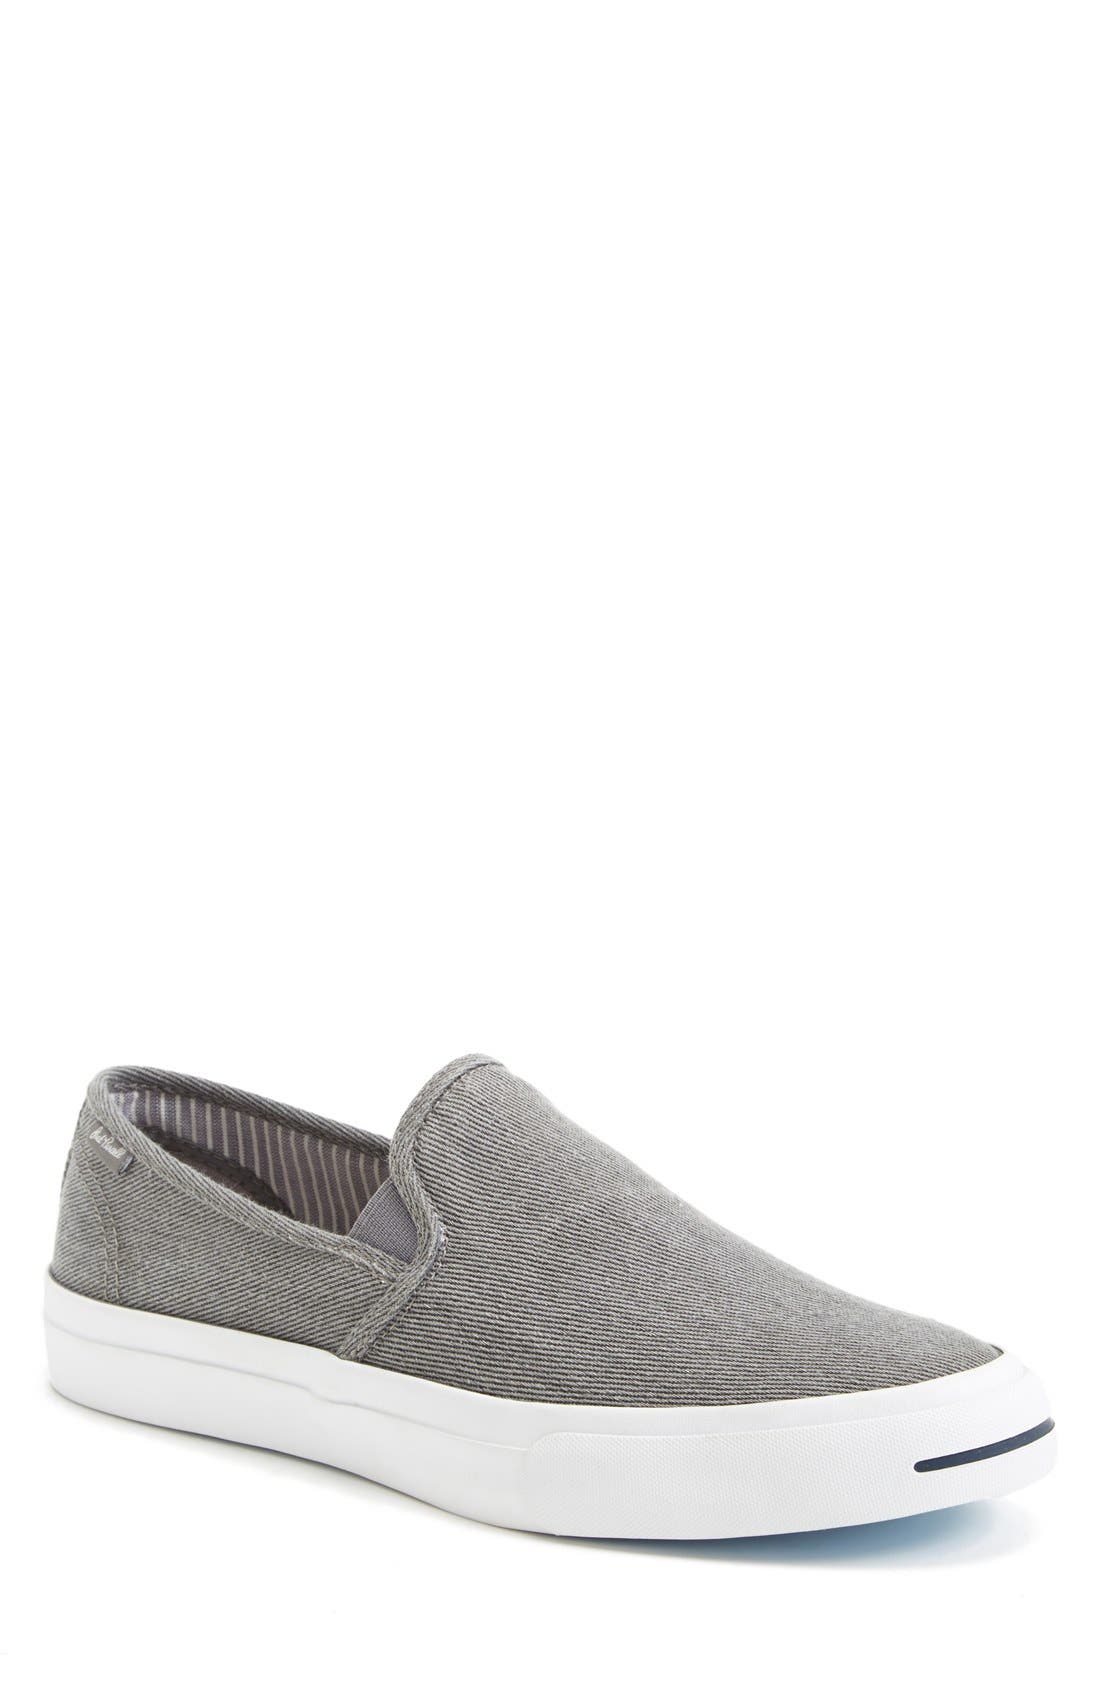 Converse | Jack Purcell II Slip-On 